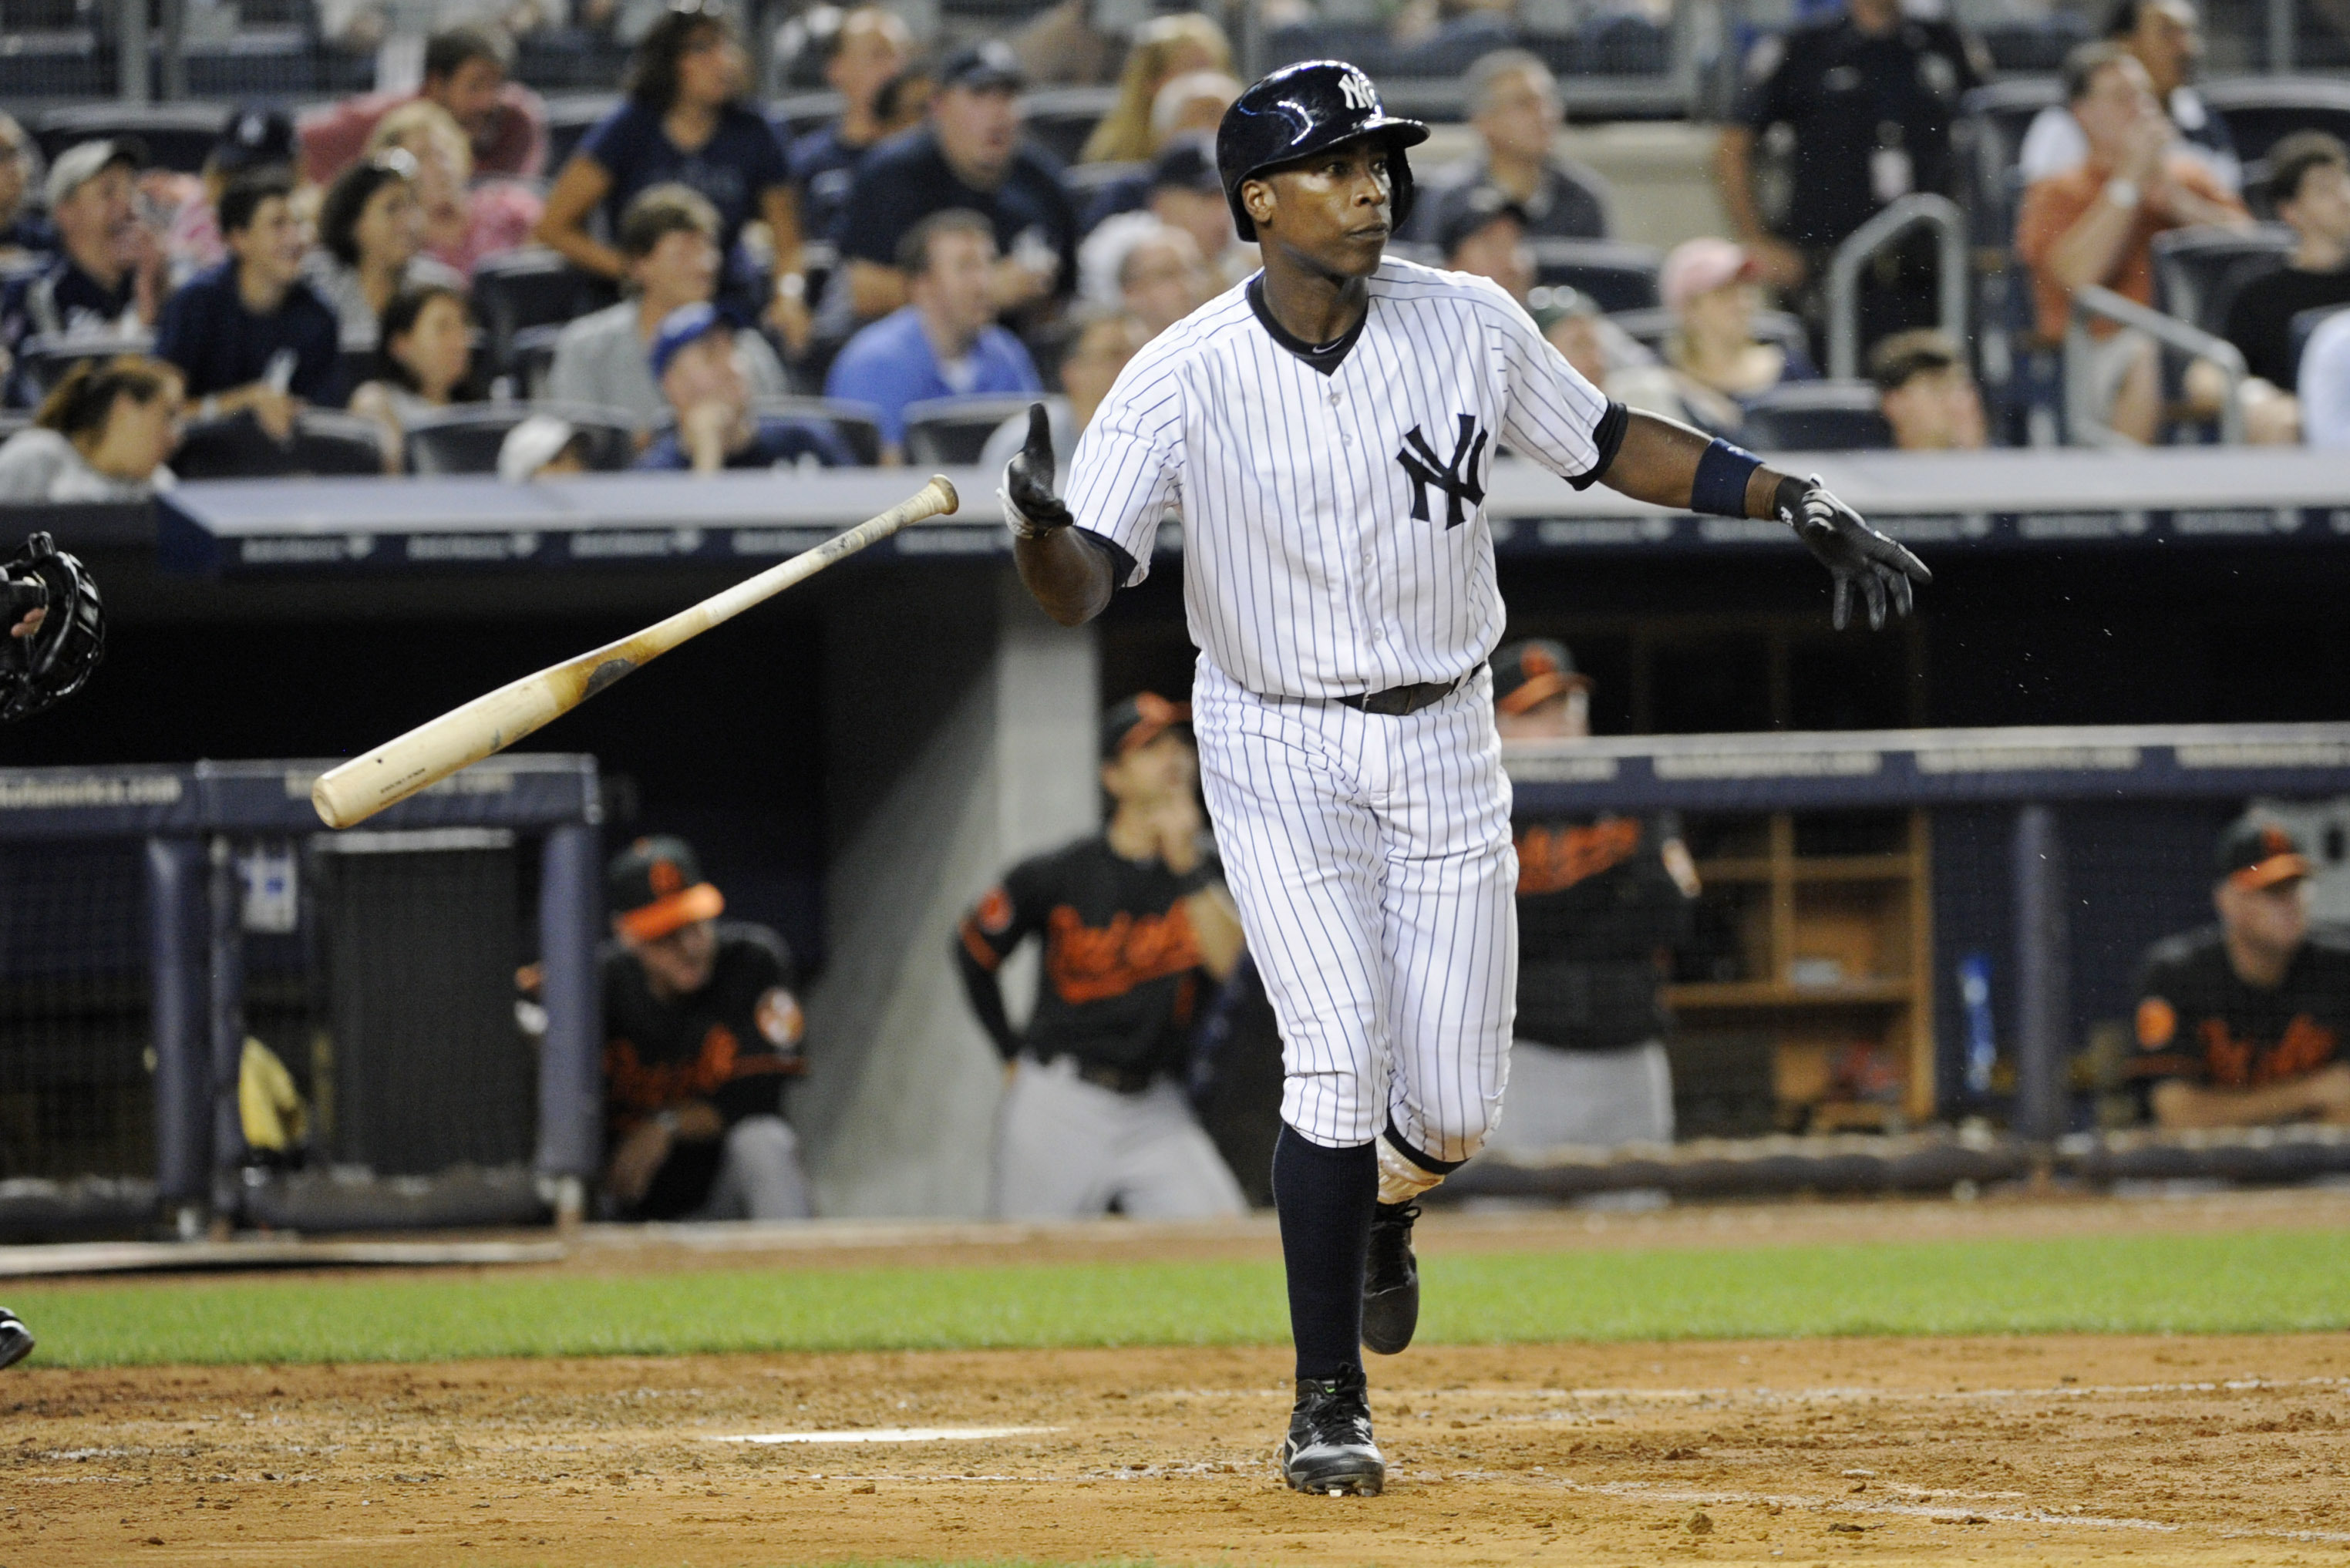 Retirement now a consideration for Alfonso Soriano - NBC Sports